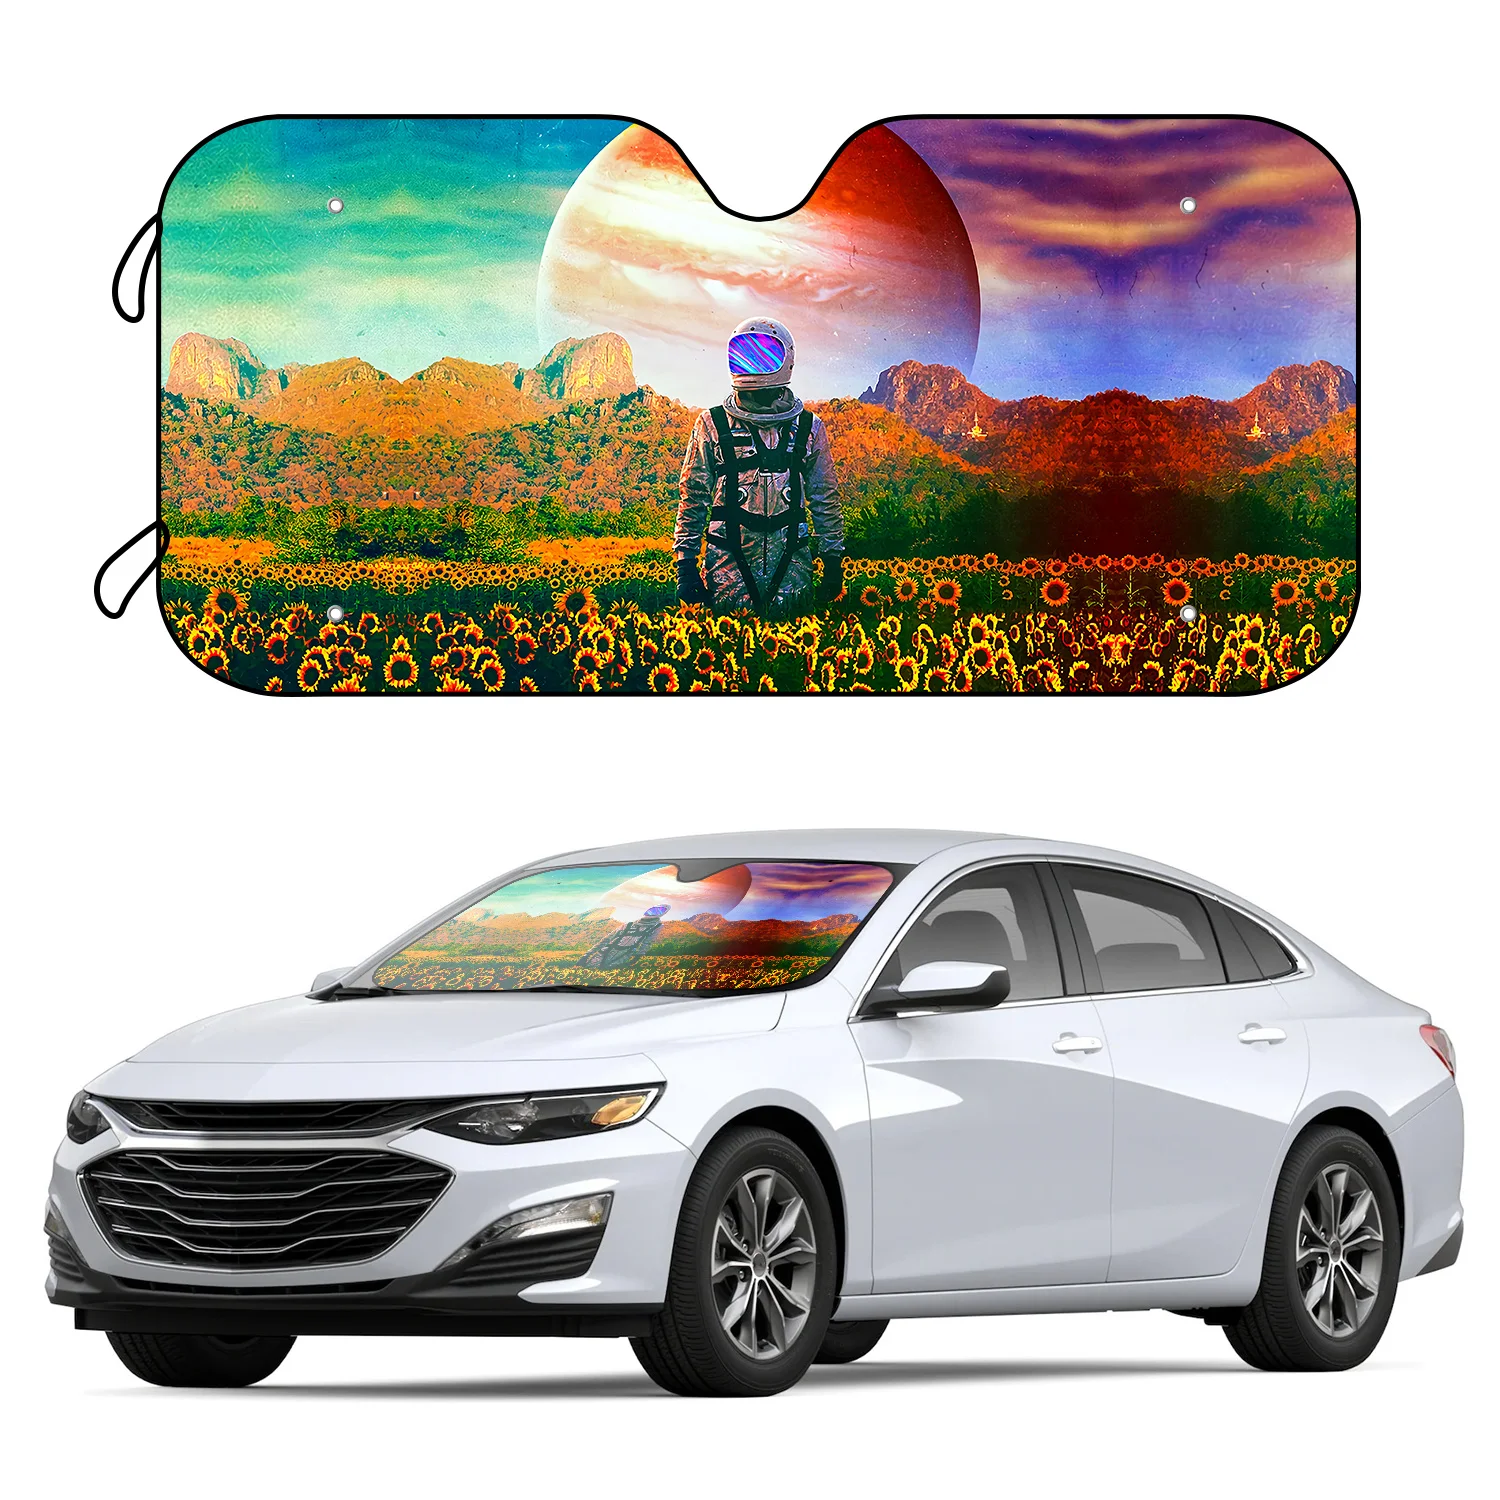 

Keep Cool in the Heat with this 1pc Car Windshield Sunshade Blocking UV Foldable Sunshade Sunflower Astronaut + 4 Free Suction C